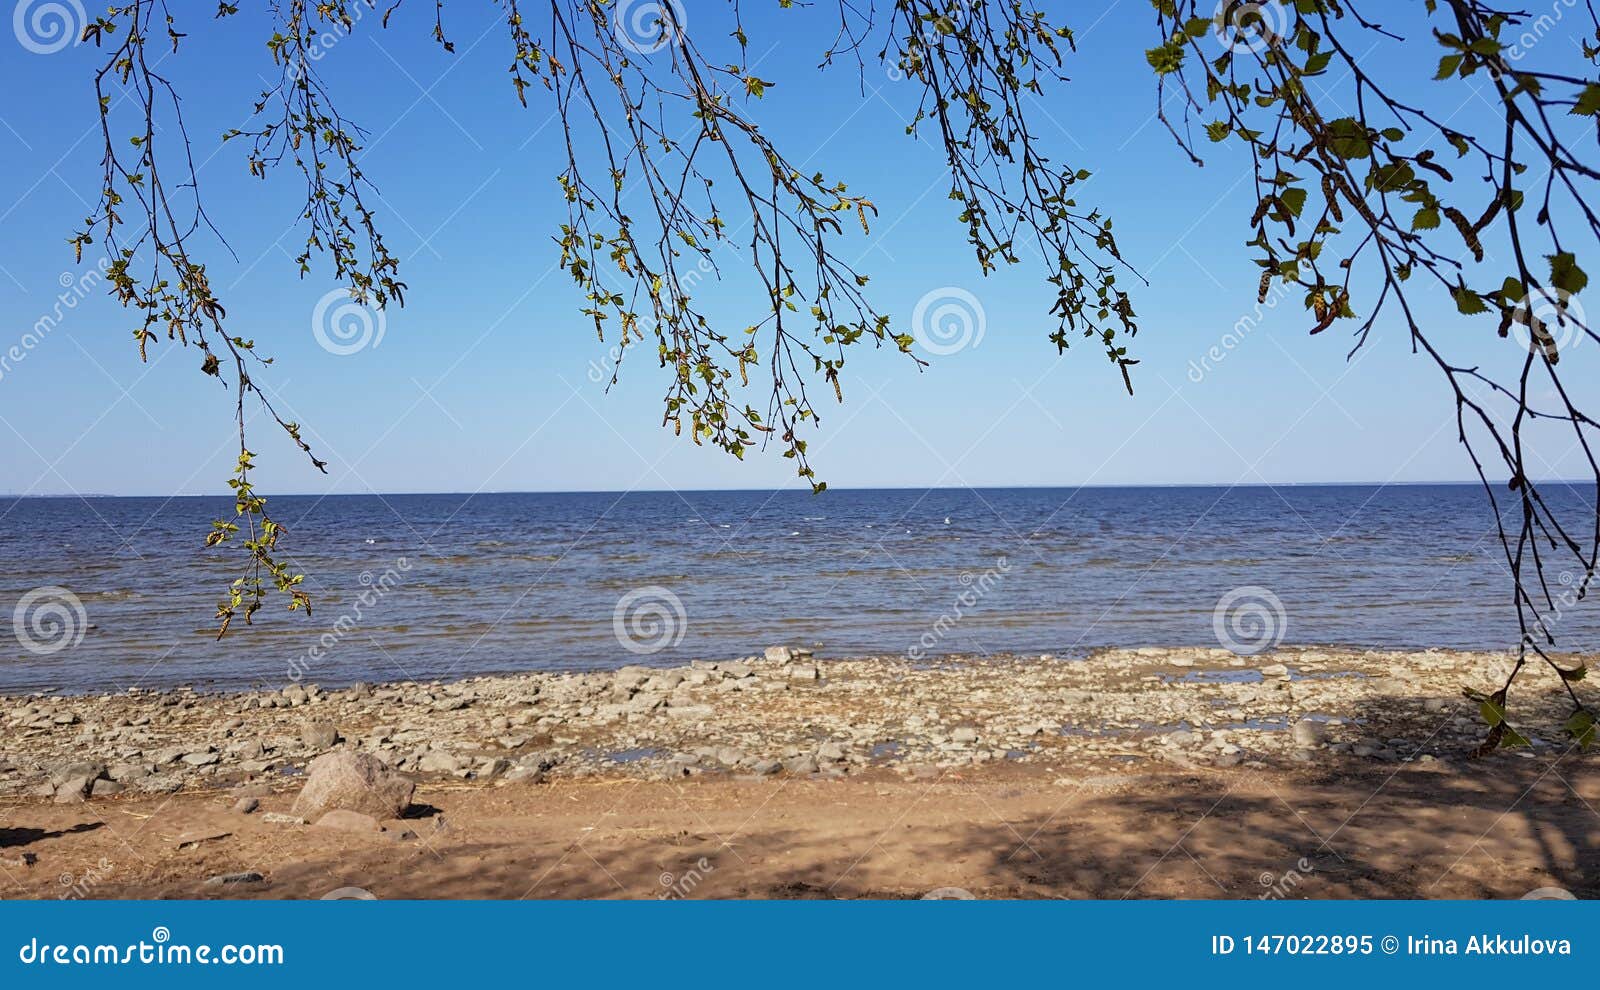 Romantic place on seacoast stock image. Image of seaview - 147022895